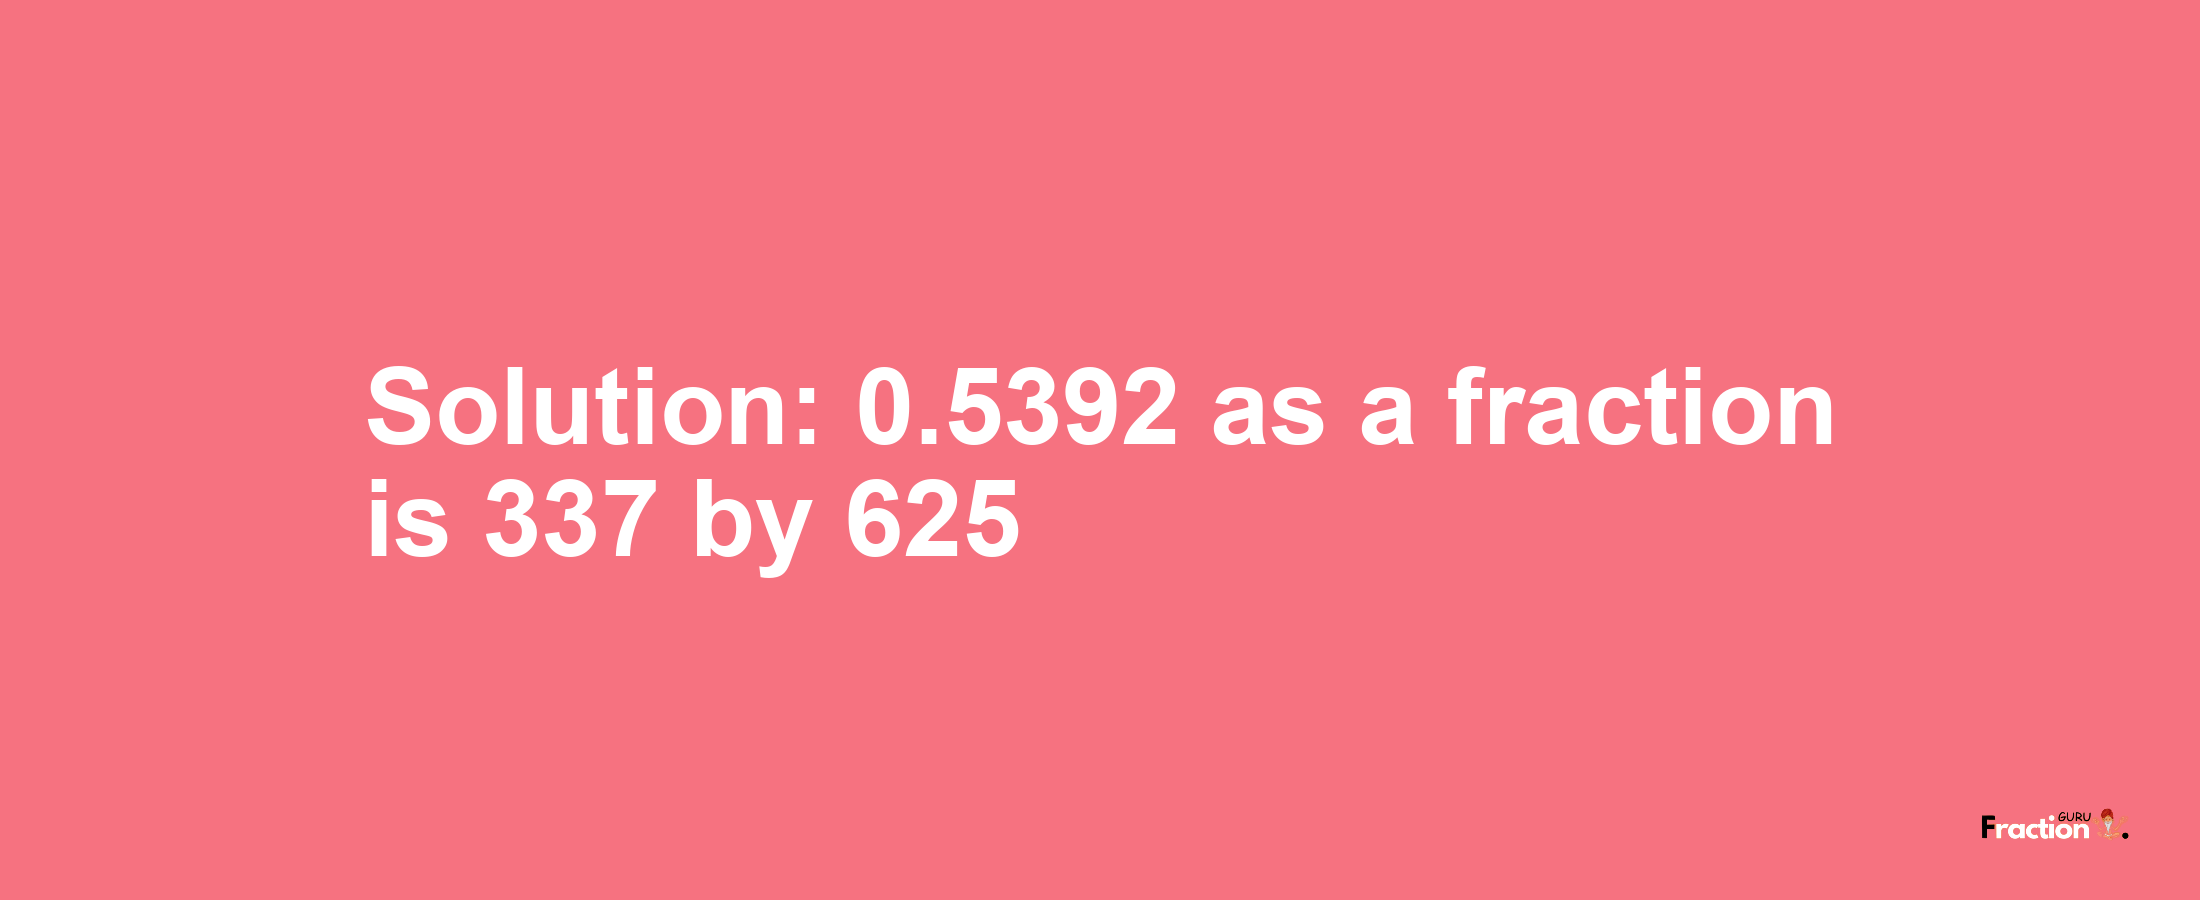 Solution:0.5392 as a fraction is 337/625